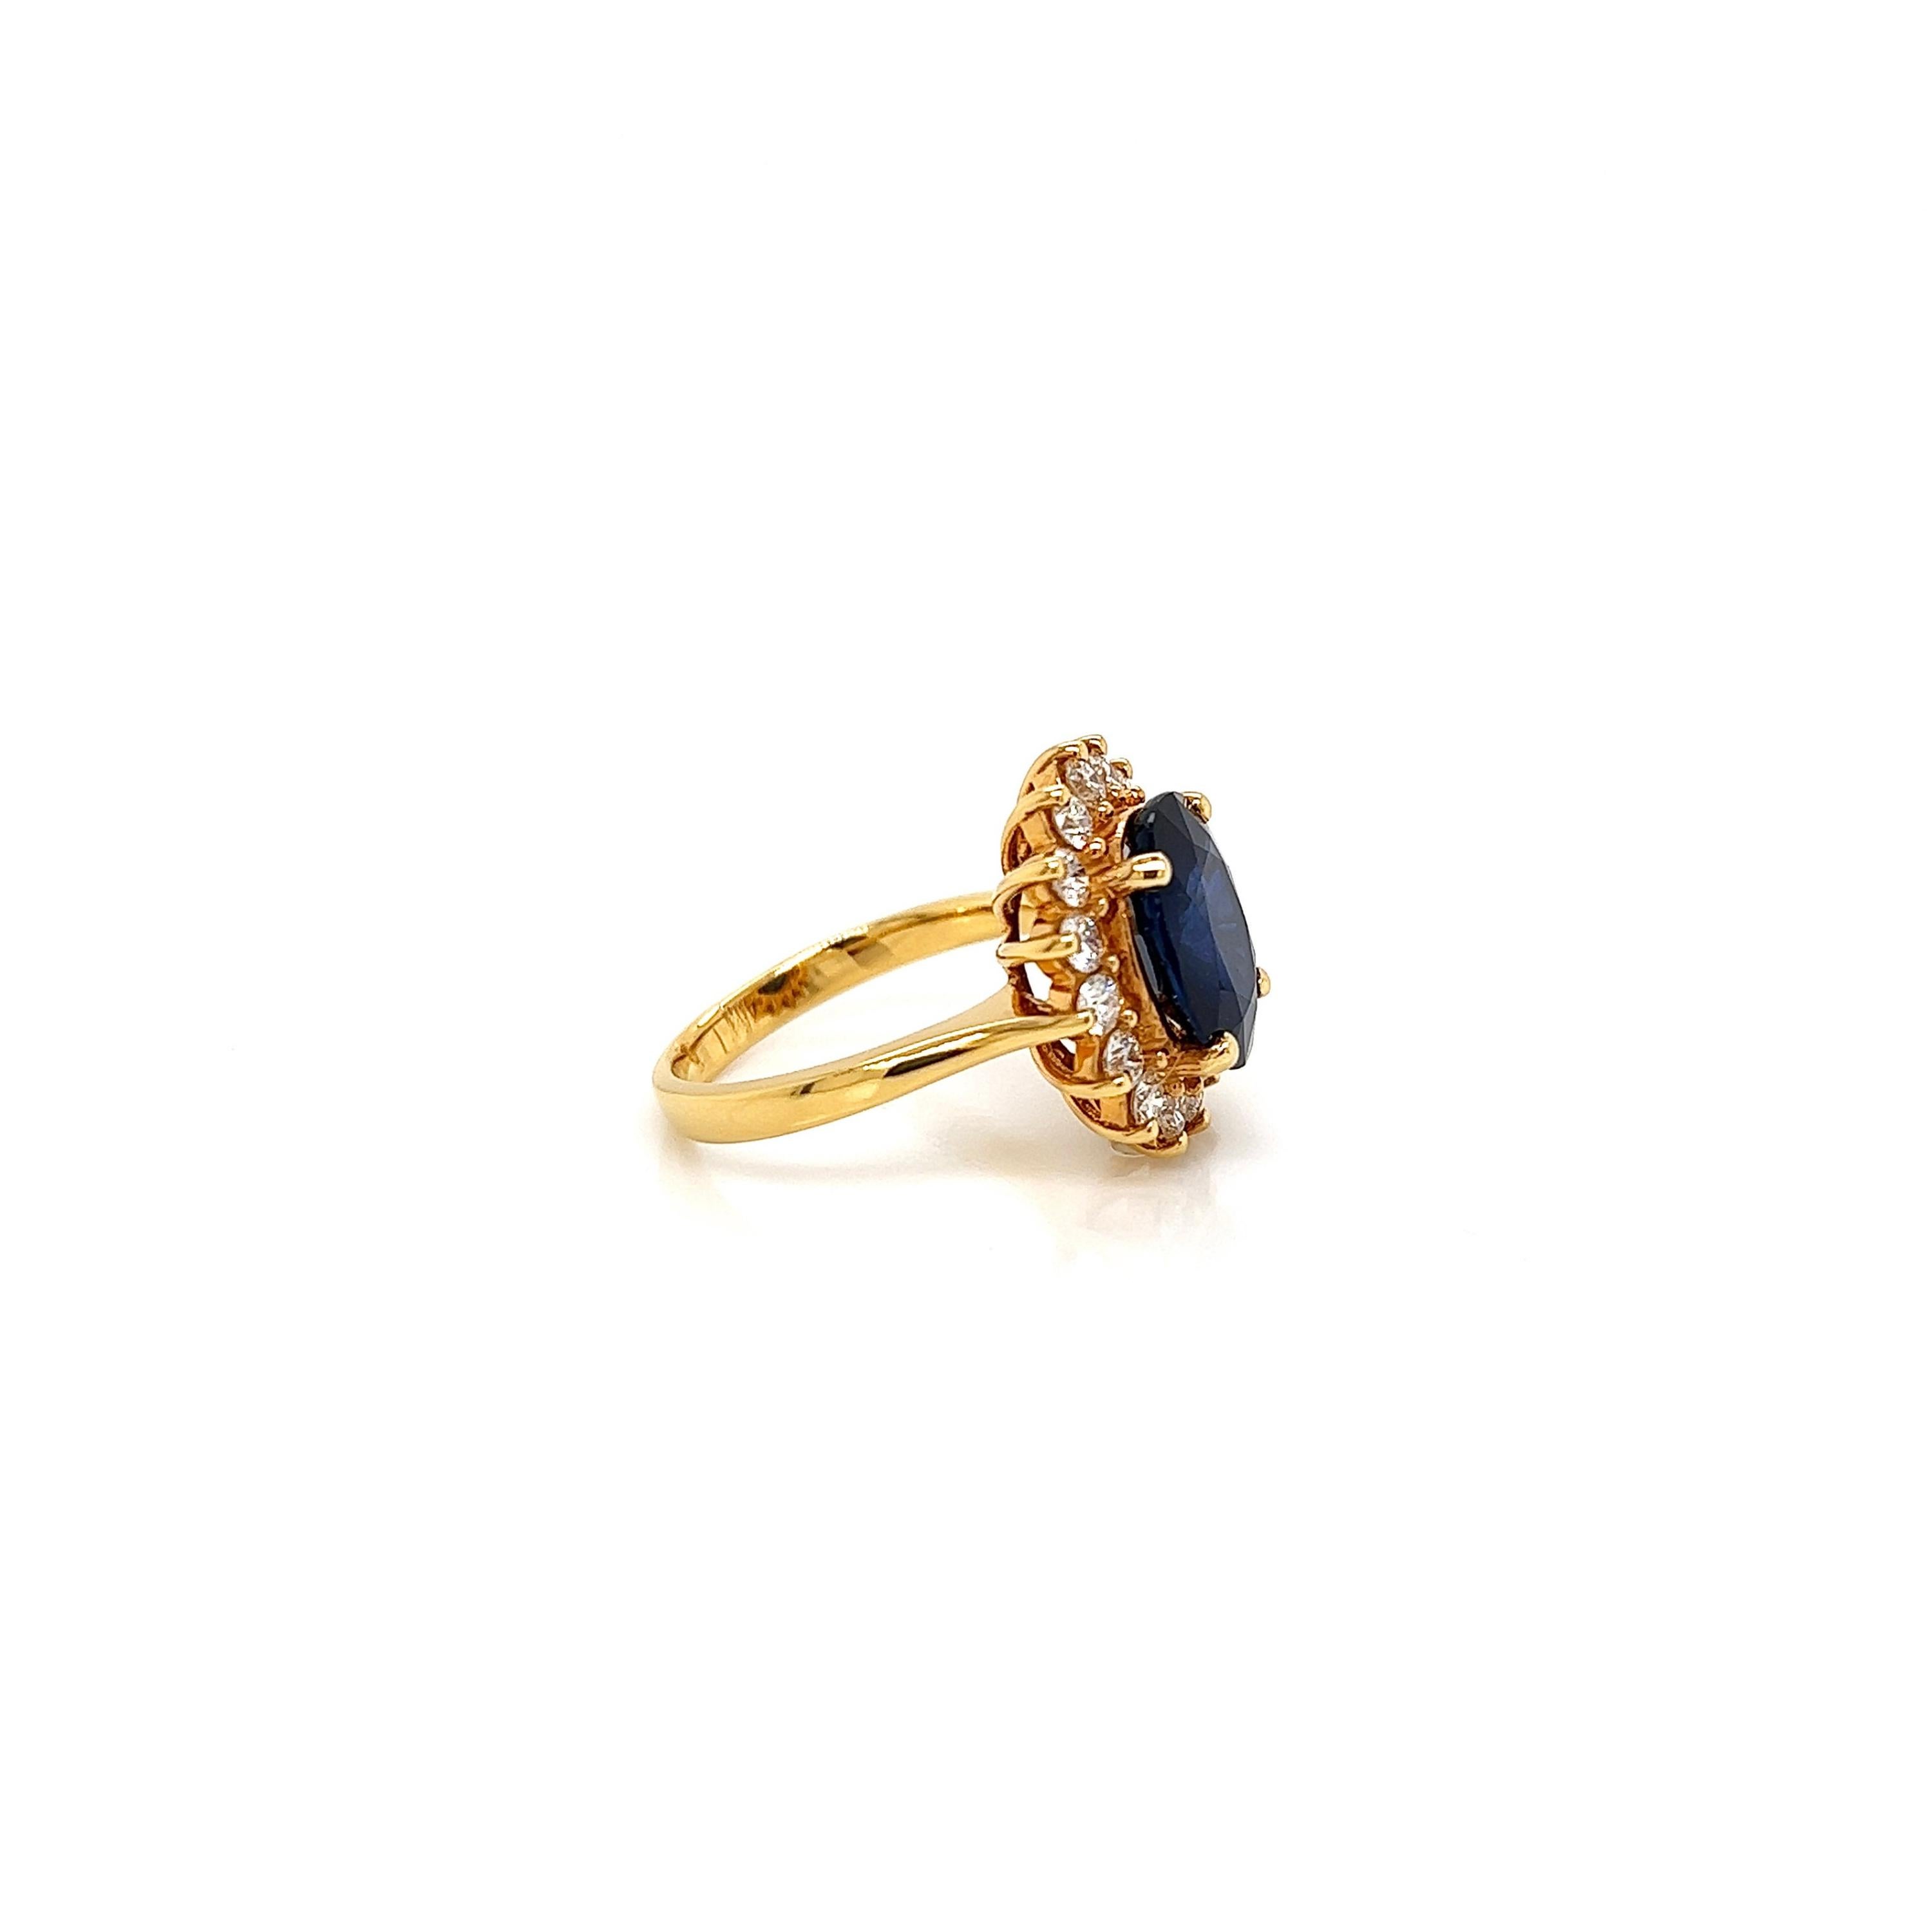 Women's 4.63 Carat Halo Blue Ceylon Sapphire Diamond Ring Floral Sapphire Ring in Gold For Sale